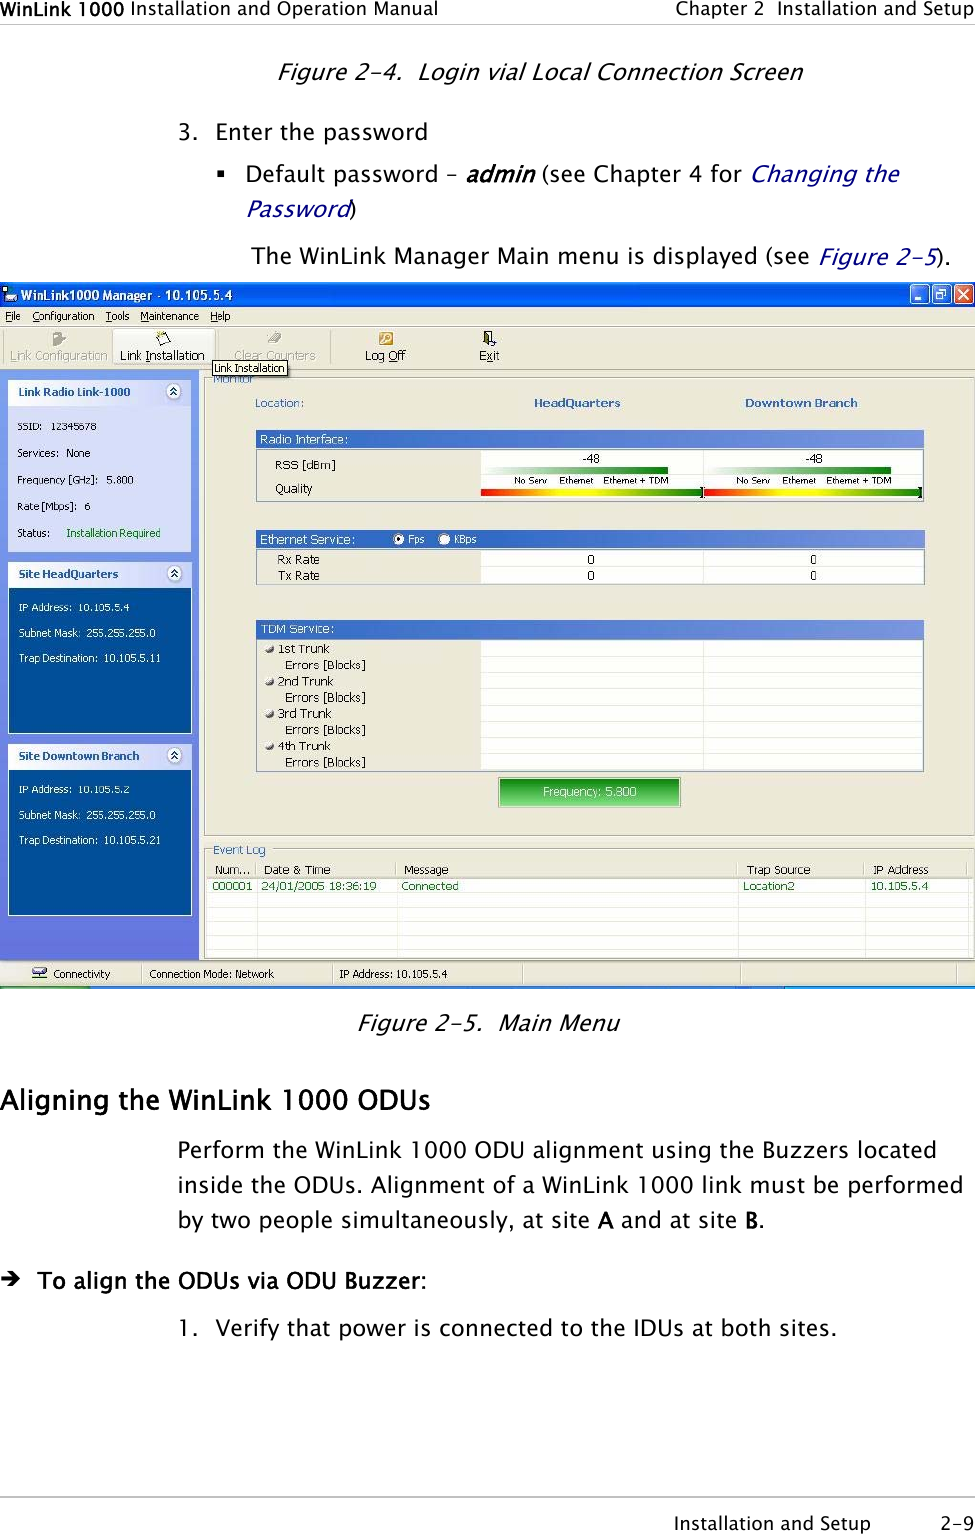 WinLink 1000 Installation and Operation Manual  Chapter 2  Installation and Setup  Installation and Setup  2-9 Figure 2-4.  Login vial Local Connection Screen 3. Enter the password  Default password – admin (see Chapter 4 for Changing the Password) The WinLink Manager Main menu is displayed (see Figure 2-5).  Figure 2-5.  Main Menu Aligning the WinLink 1000 ODUs Perform the WinLink 1000 ODU alignment using the Buzzers located inside the ODUs. Alignment of a WinLink 1000 link must be performed by two people simultaneously, at site A and at site B. Î To align the ODUs via ODU Buzzer: 1. Verify that power is connected to the IDUs at both sites. 